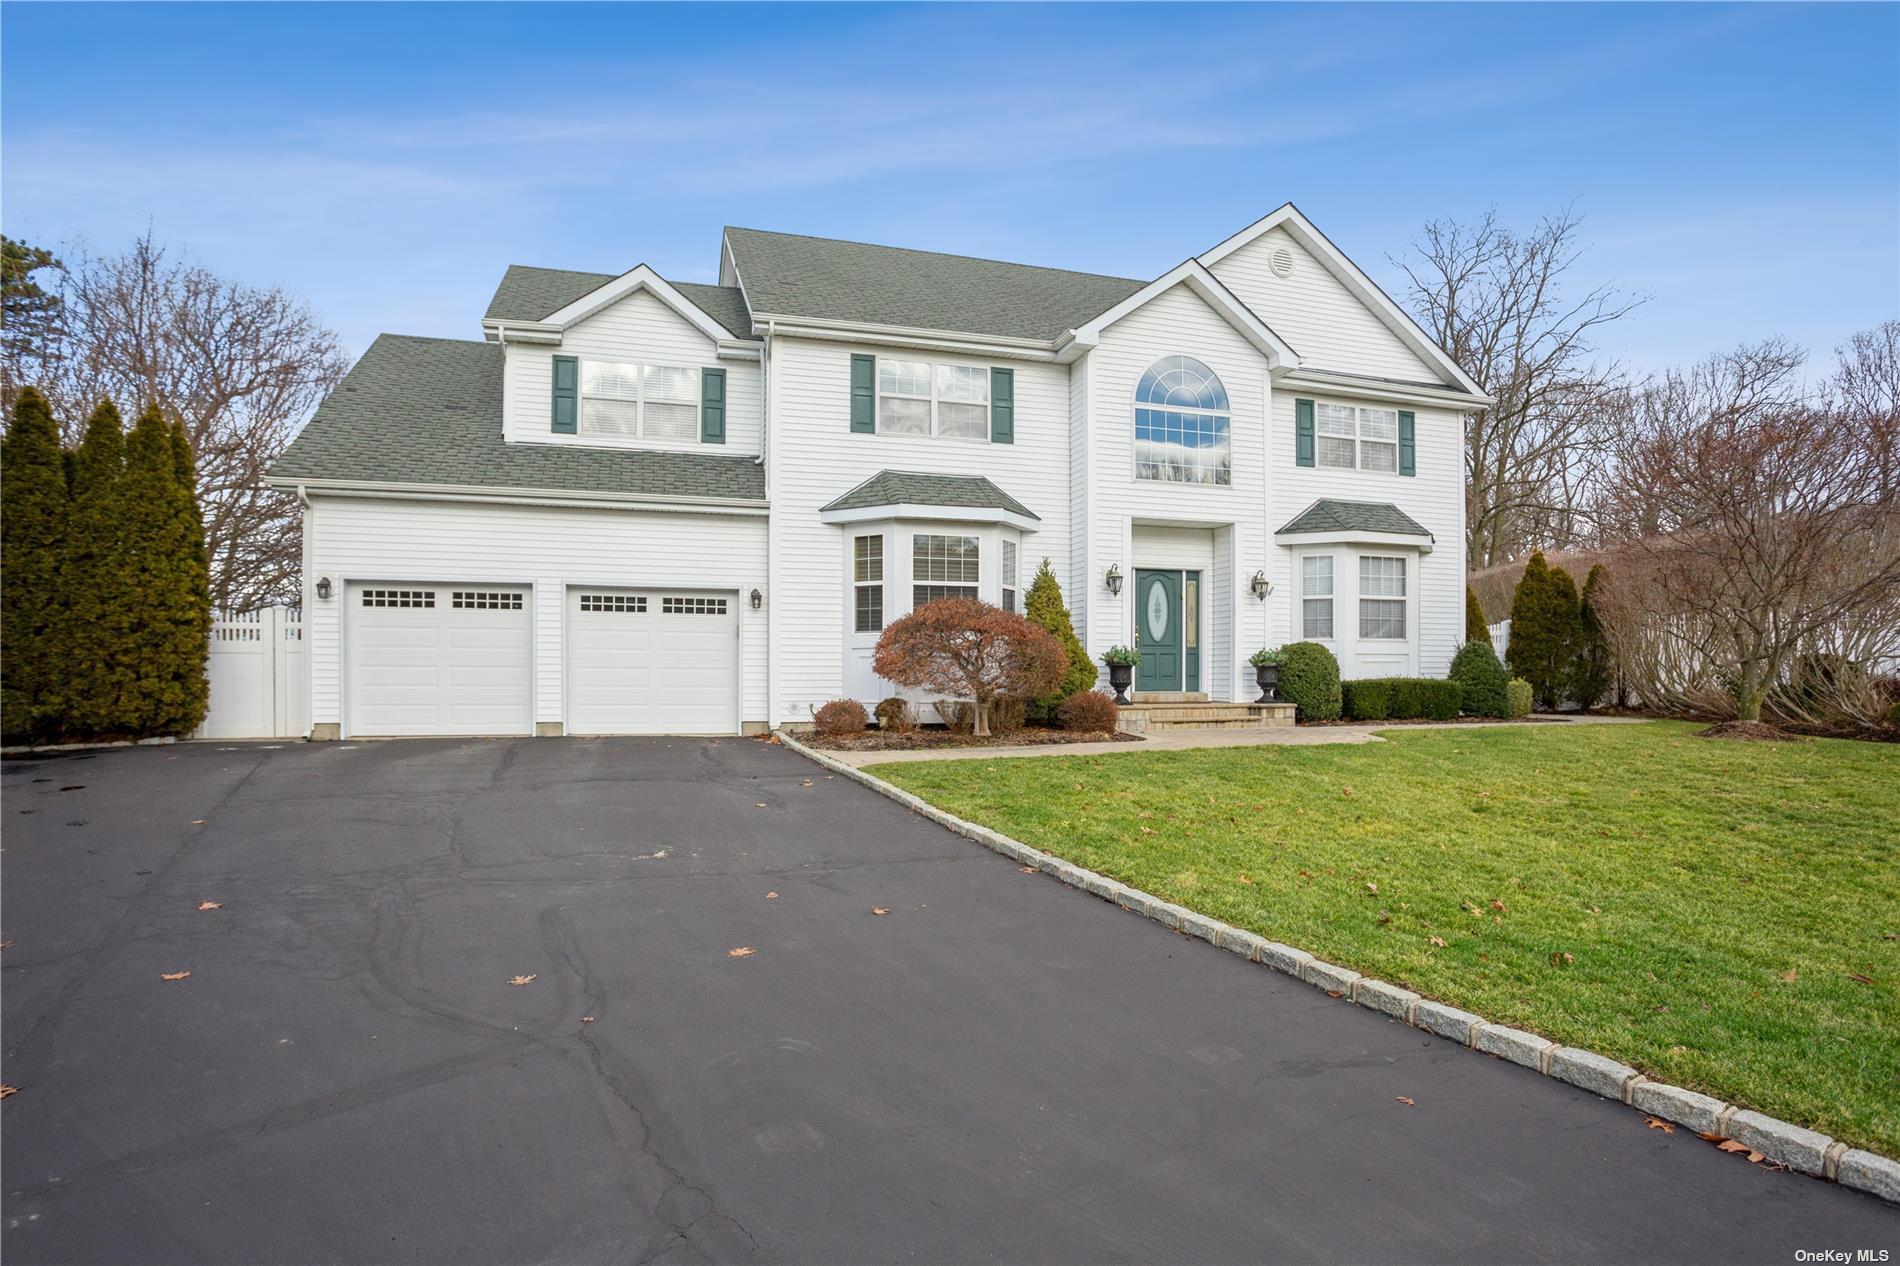 3 Sky View Court in Long Island, Hauppauge, NY 11788